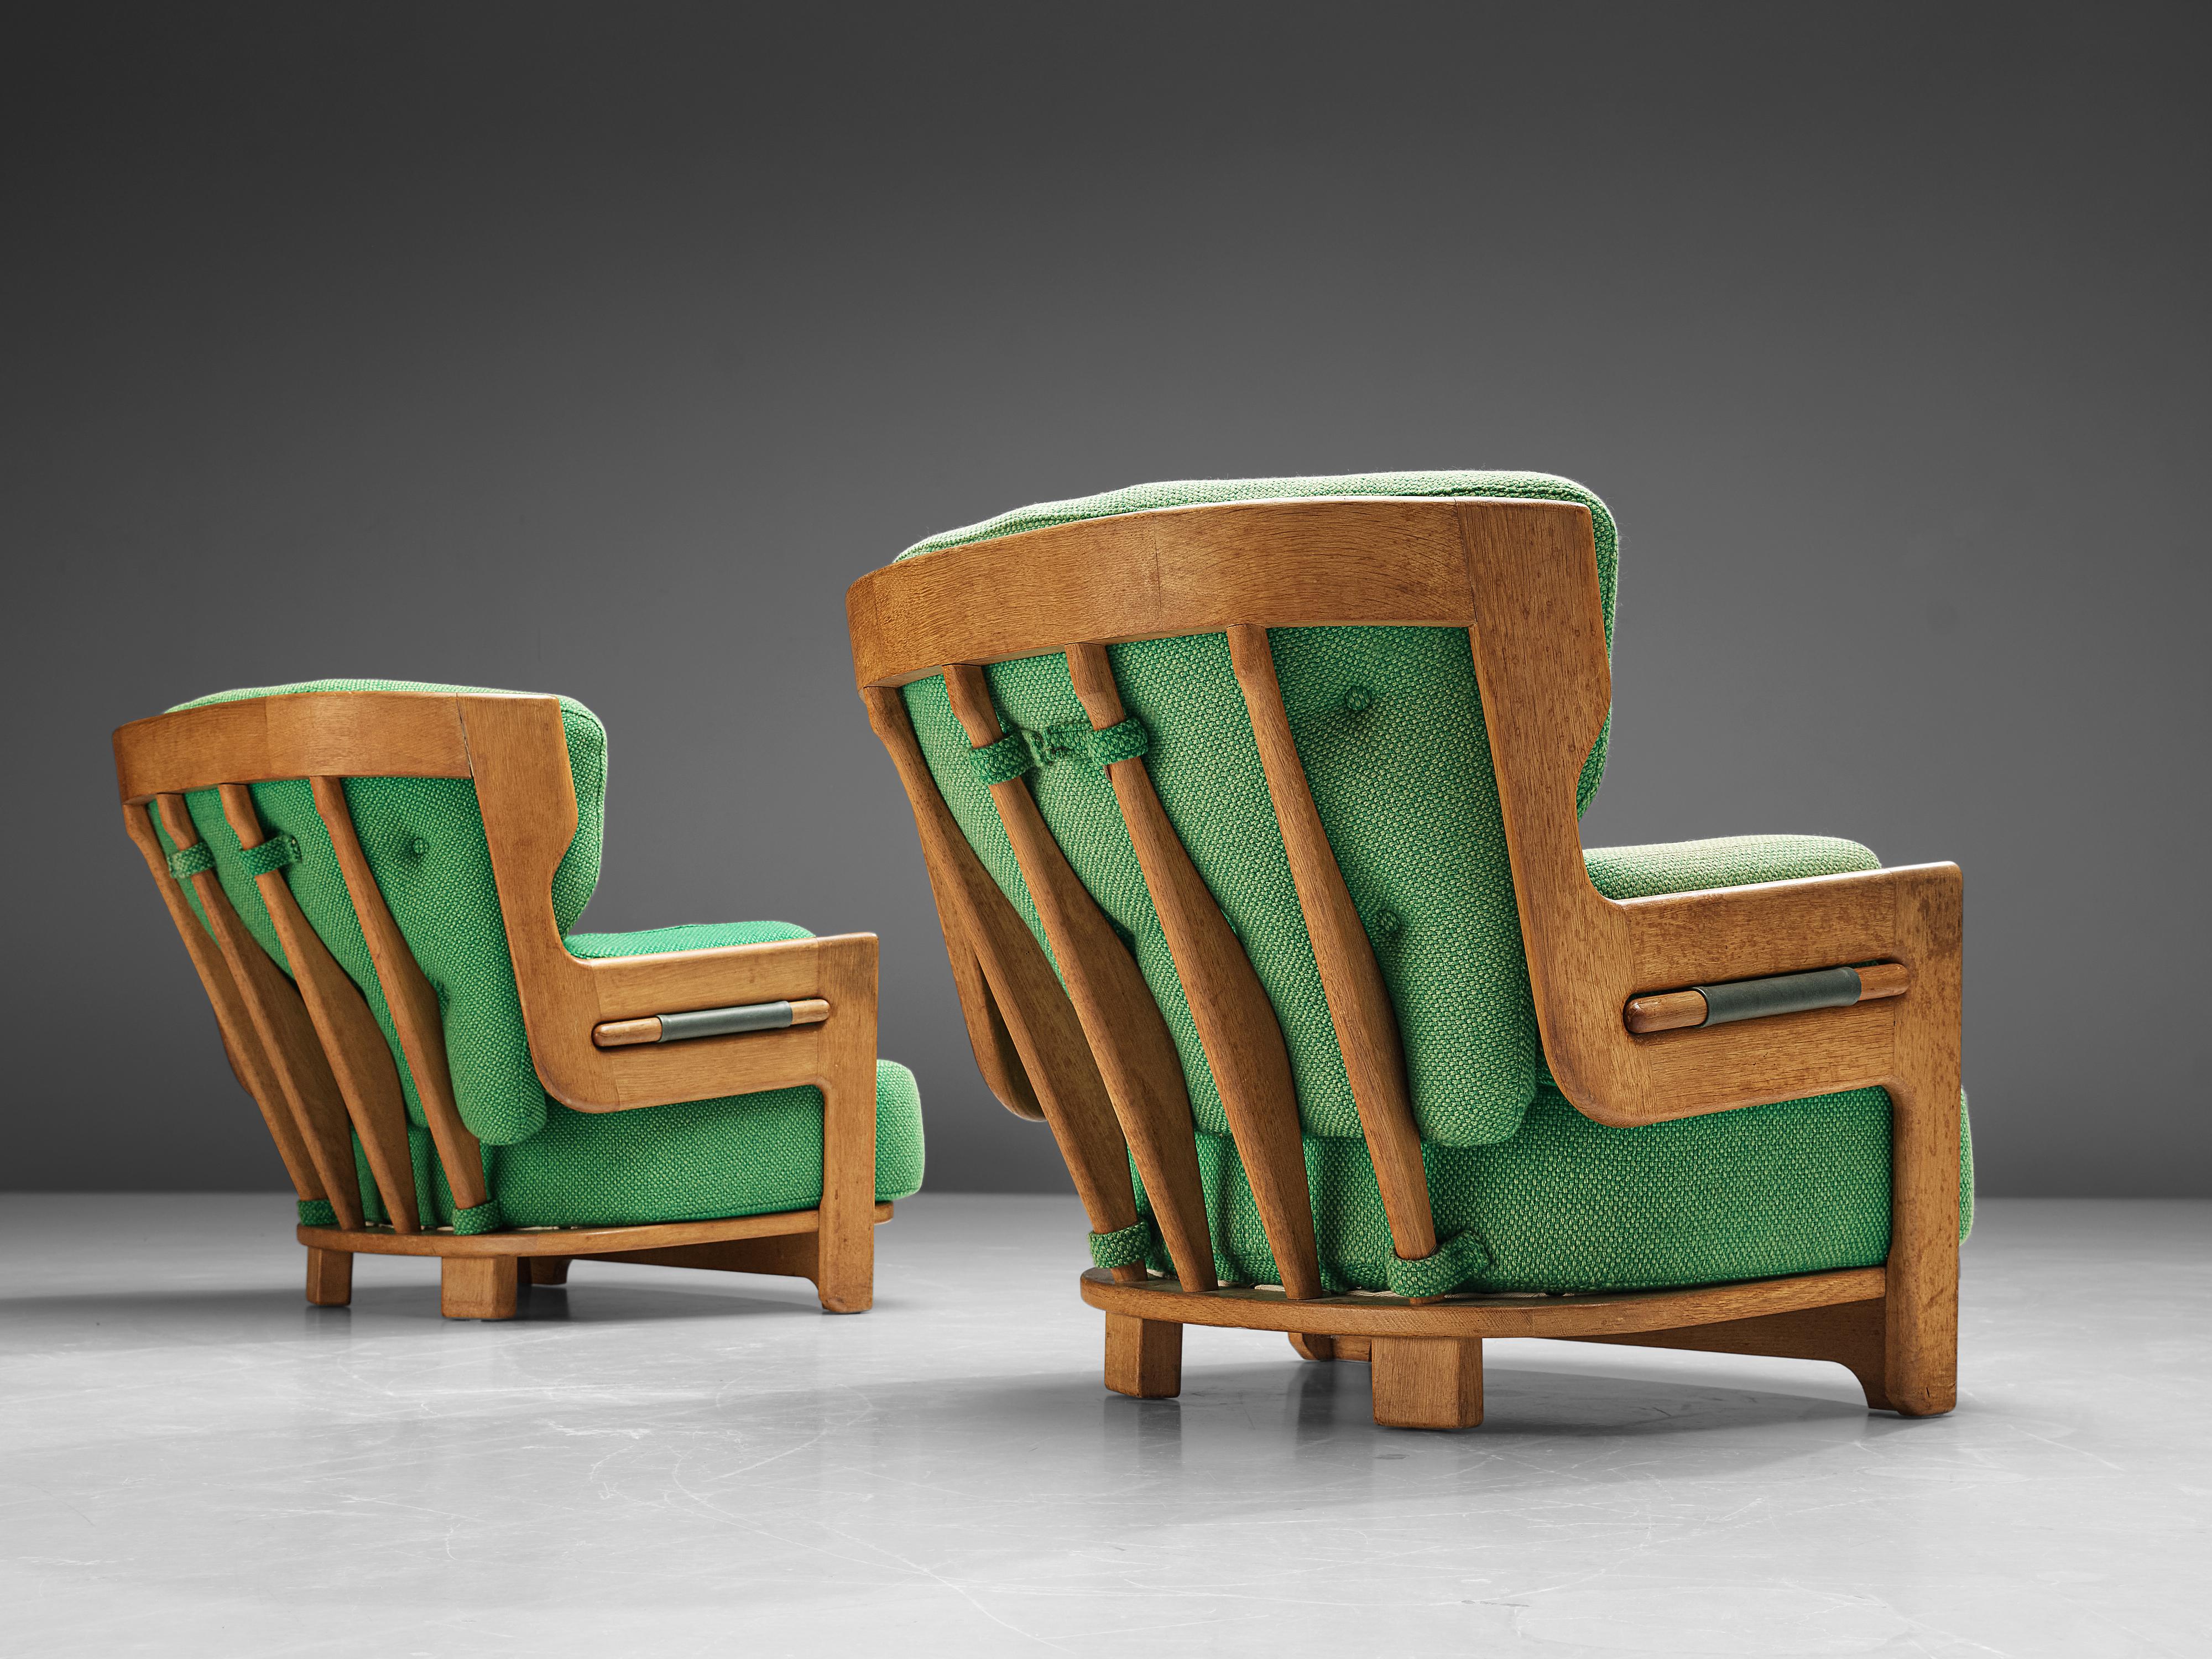 Guillerme & Chambron for Votre Maison, lounge chairs 'Denis', fabric, oak, France, 1960s

Extraordinary Guillerme and Chambron lounge chairs in solid oak with the typical characteristic decorative details at the back and capricious forms of the